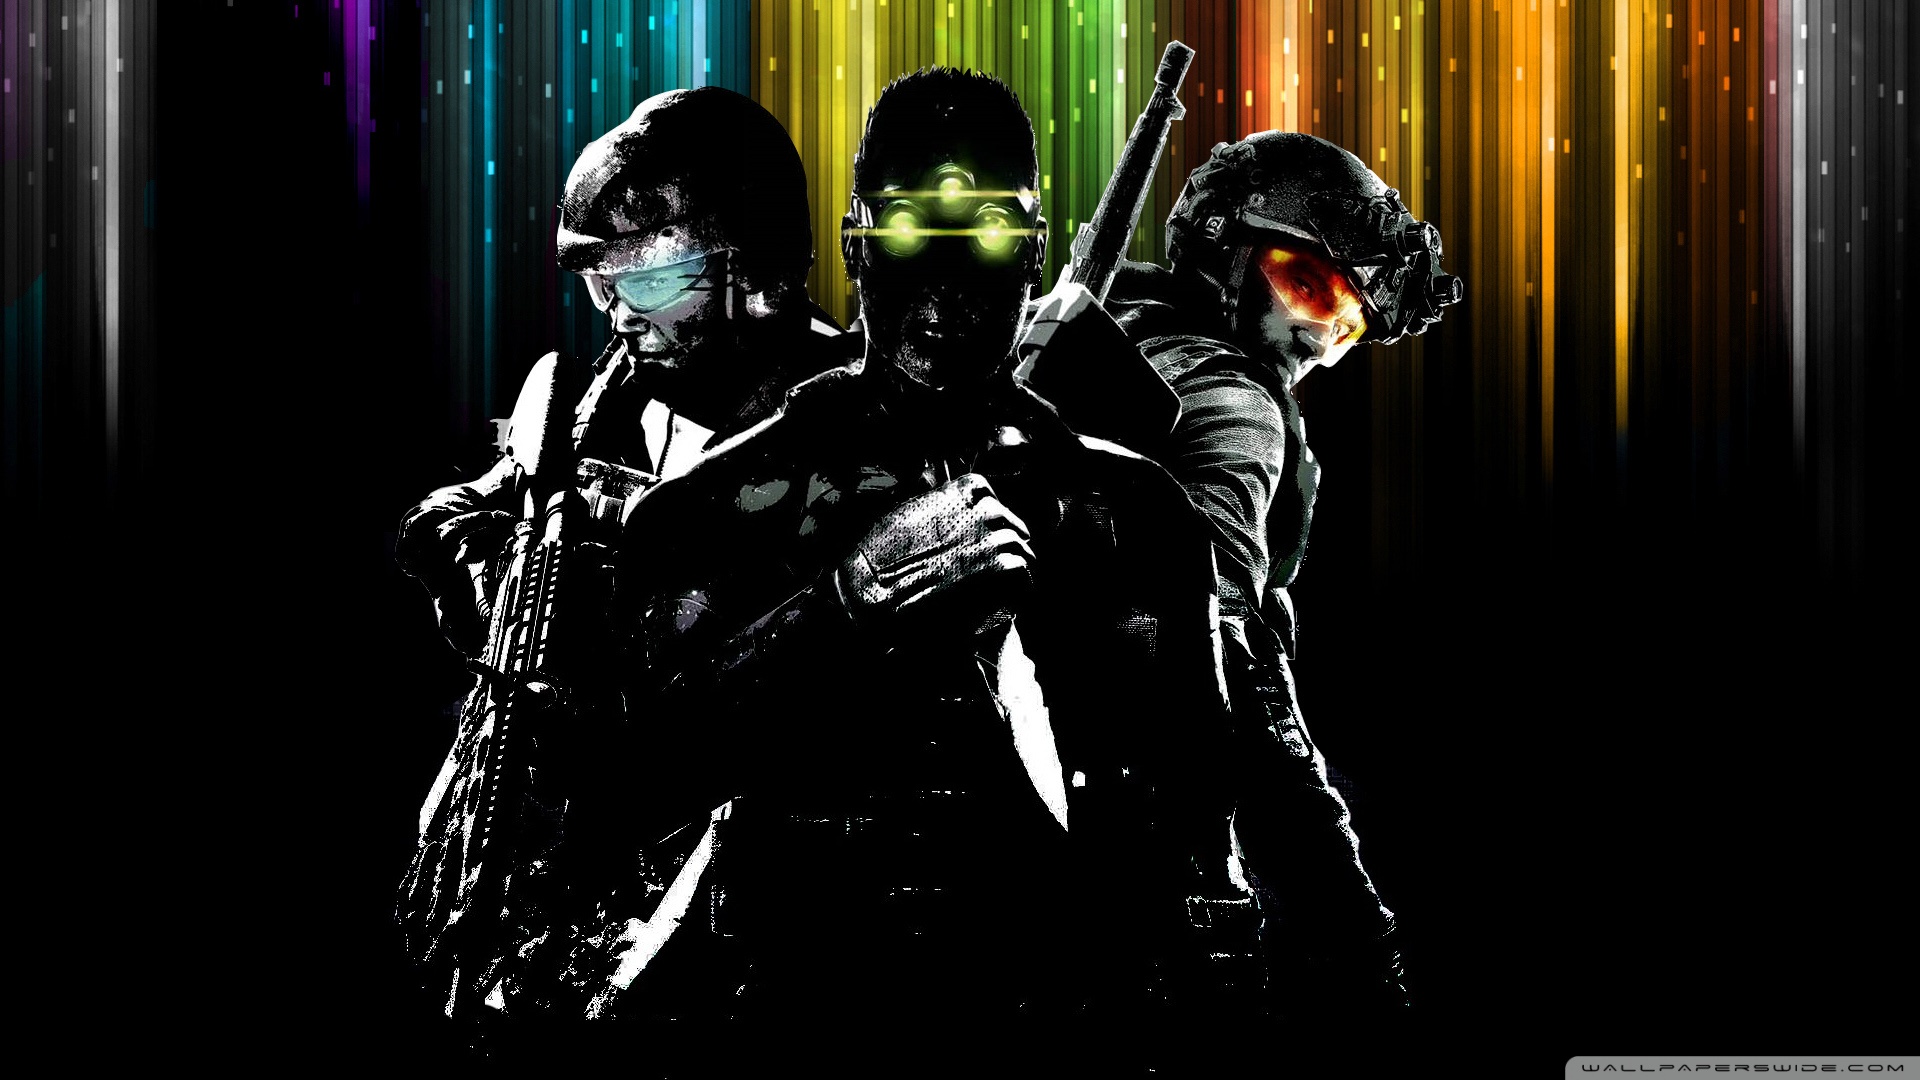 Tom Clancy Game Wallpaper 1920x1080 Tom Clancy Game